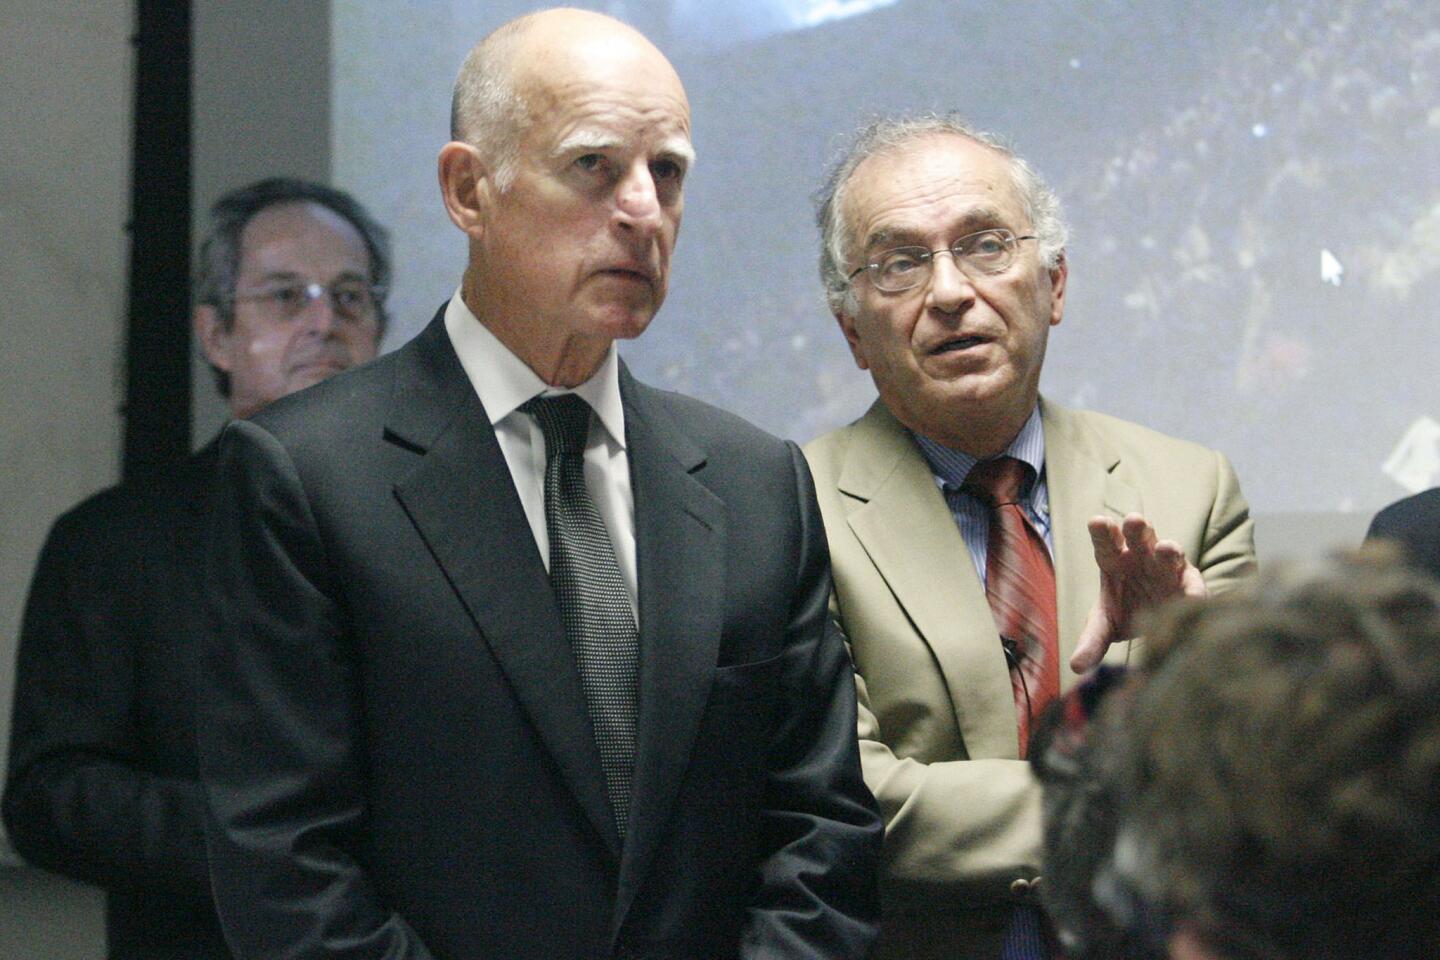 Gov. Jerry Brown, from left, listens to Caltech President Jean-Lou Chameau as he shows live footage of Mars rover Curiosity at JPL in Pasadena on Wednesday, August 22, 2012.